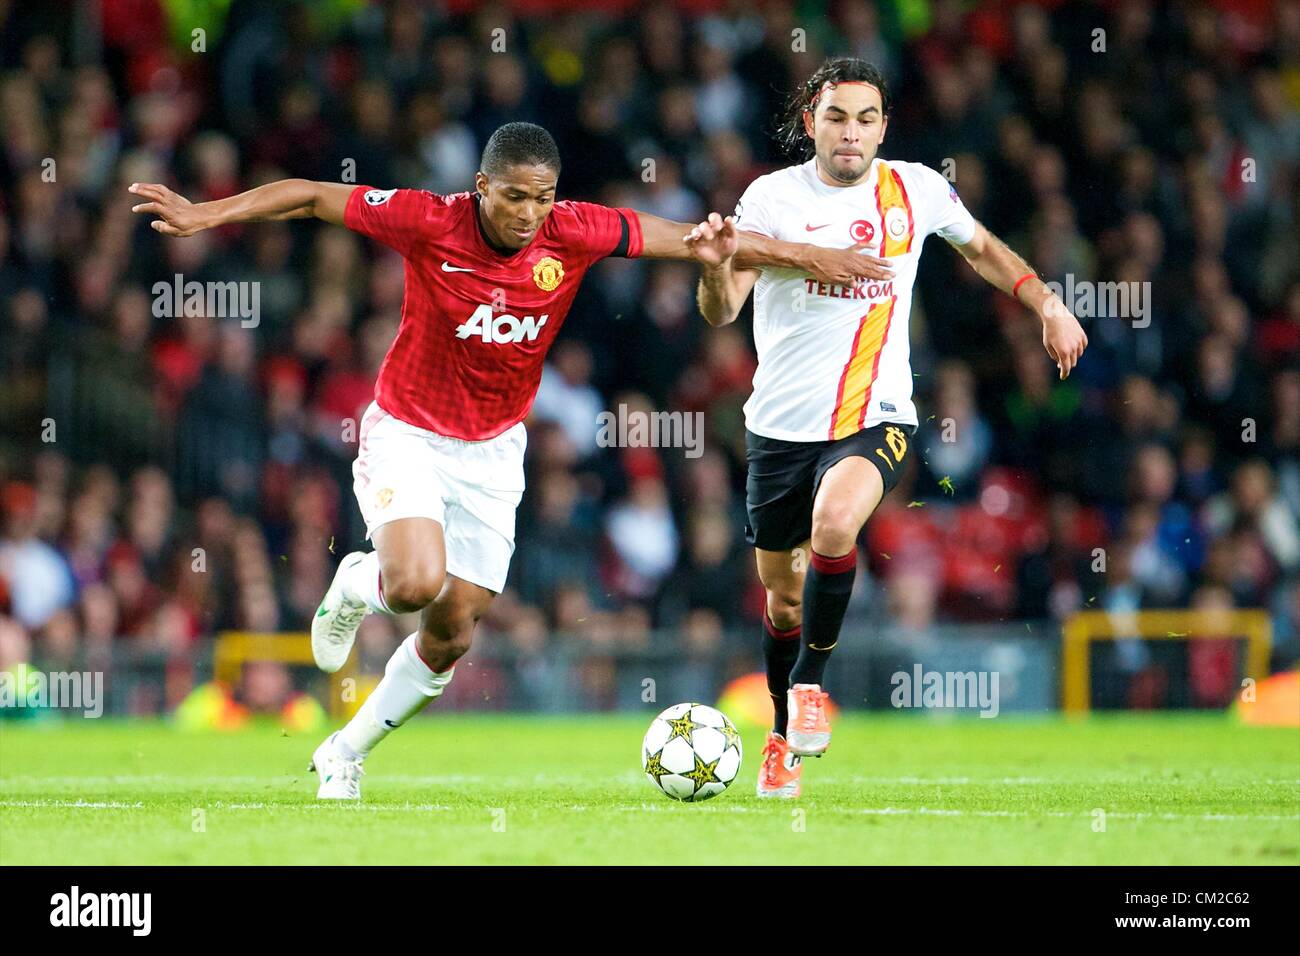 19.09.2012 Manchester, England. Manchester United's Ecuadorian midfielder Antonio Valencia and Galatasary's Turkish midfielder Sel&#xe7;uk &#x130;nan in action during the group H Champions League Football Manchester United v Galatasaray from Old Trafford. Man United ran out winners by Carricks only goal 1-0. Stock Photo